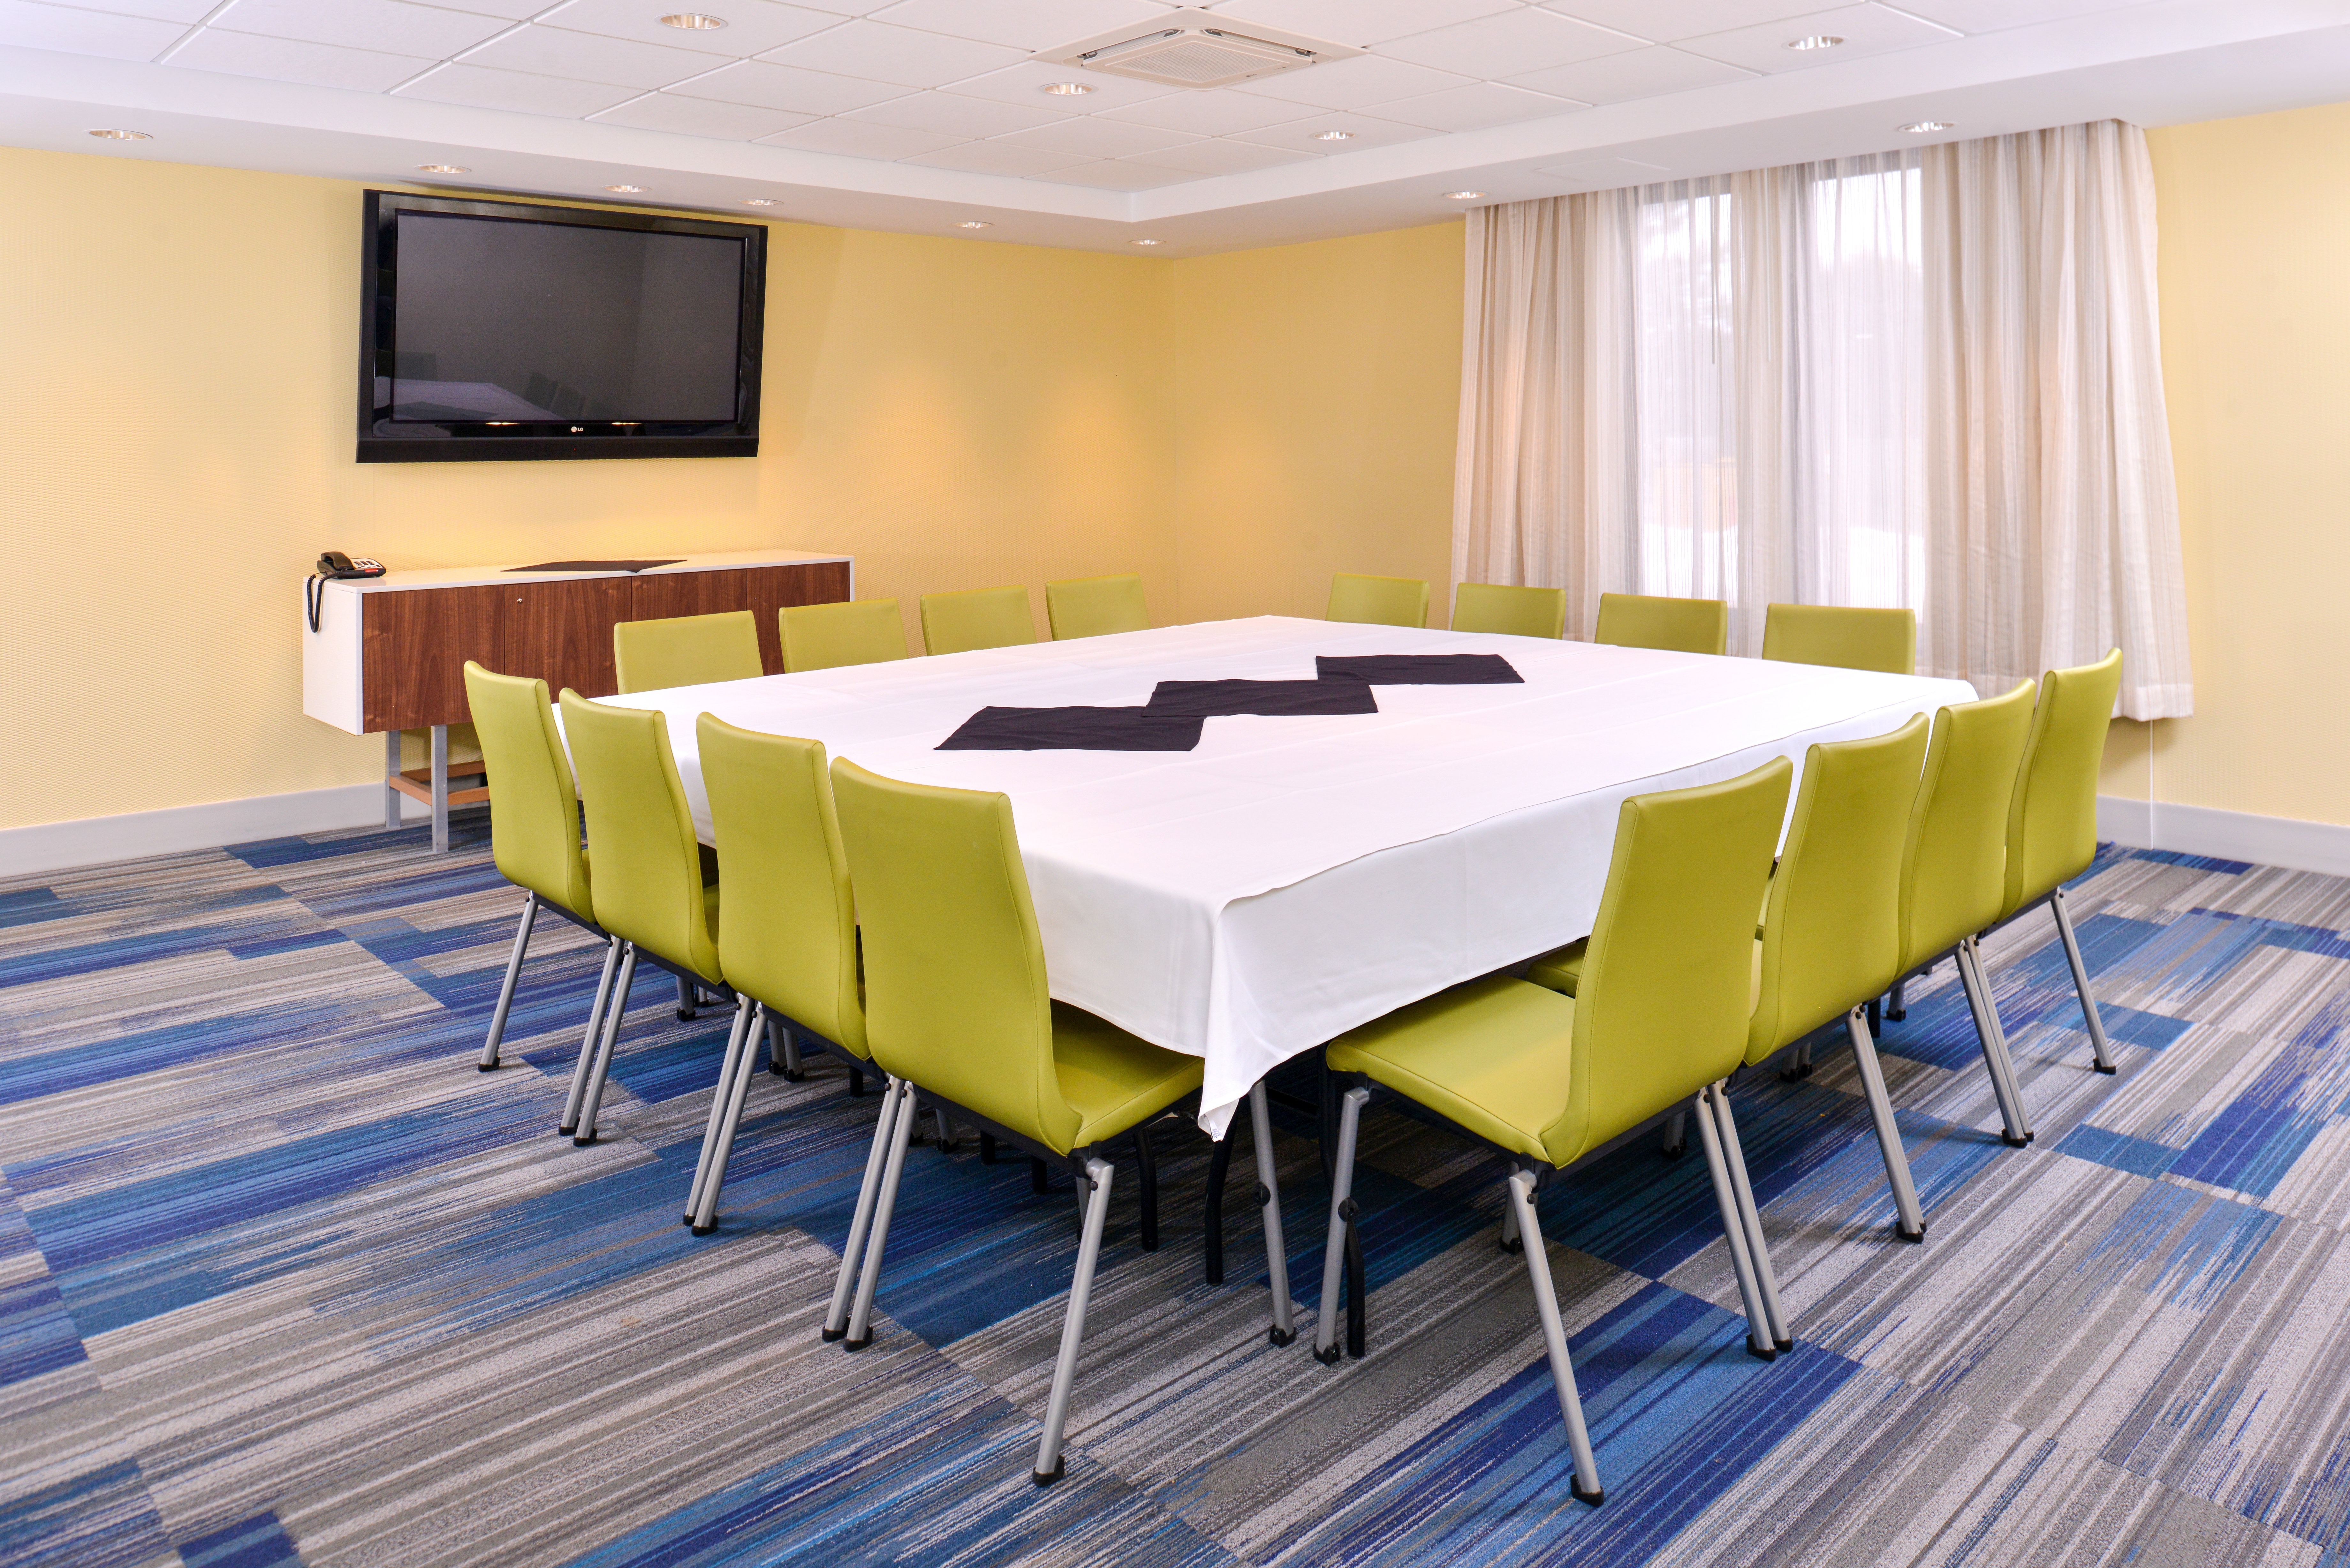 Contact the hotel today to plan your meeting!